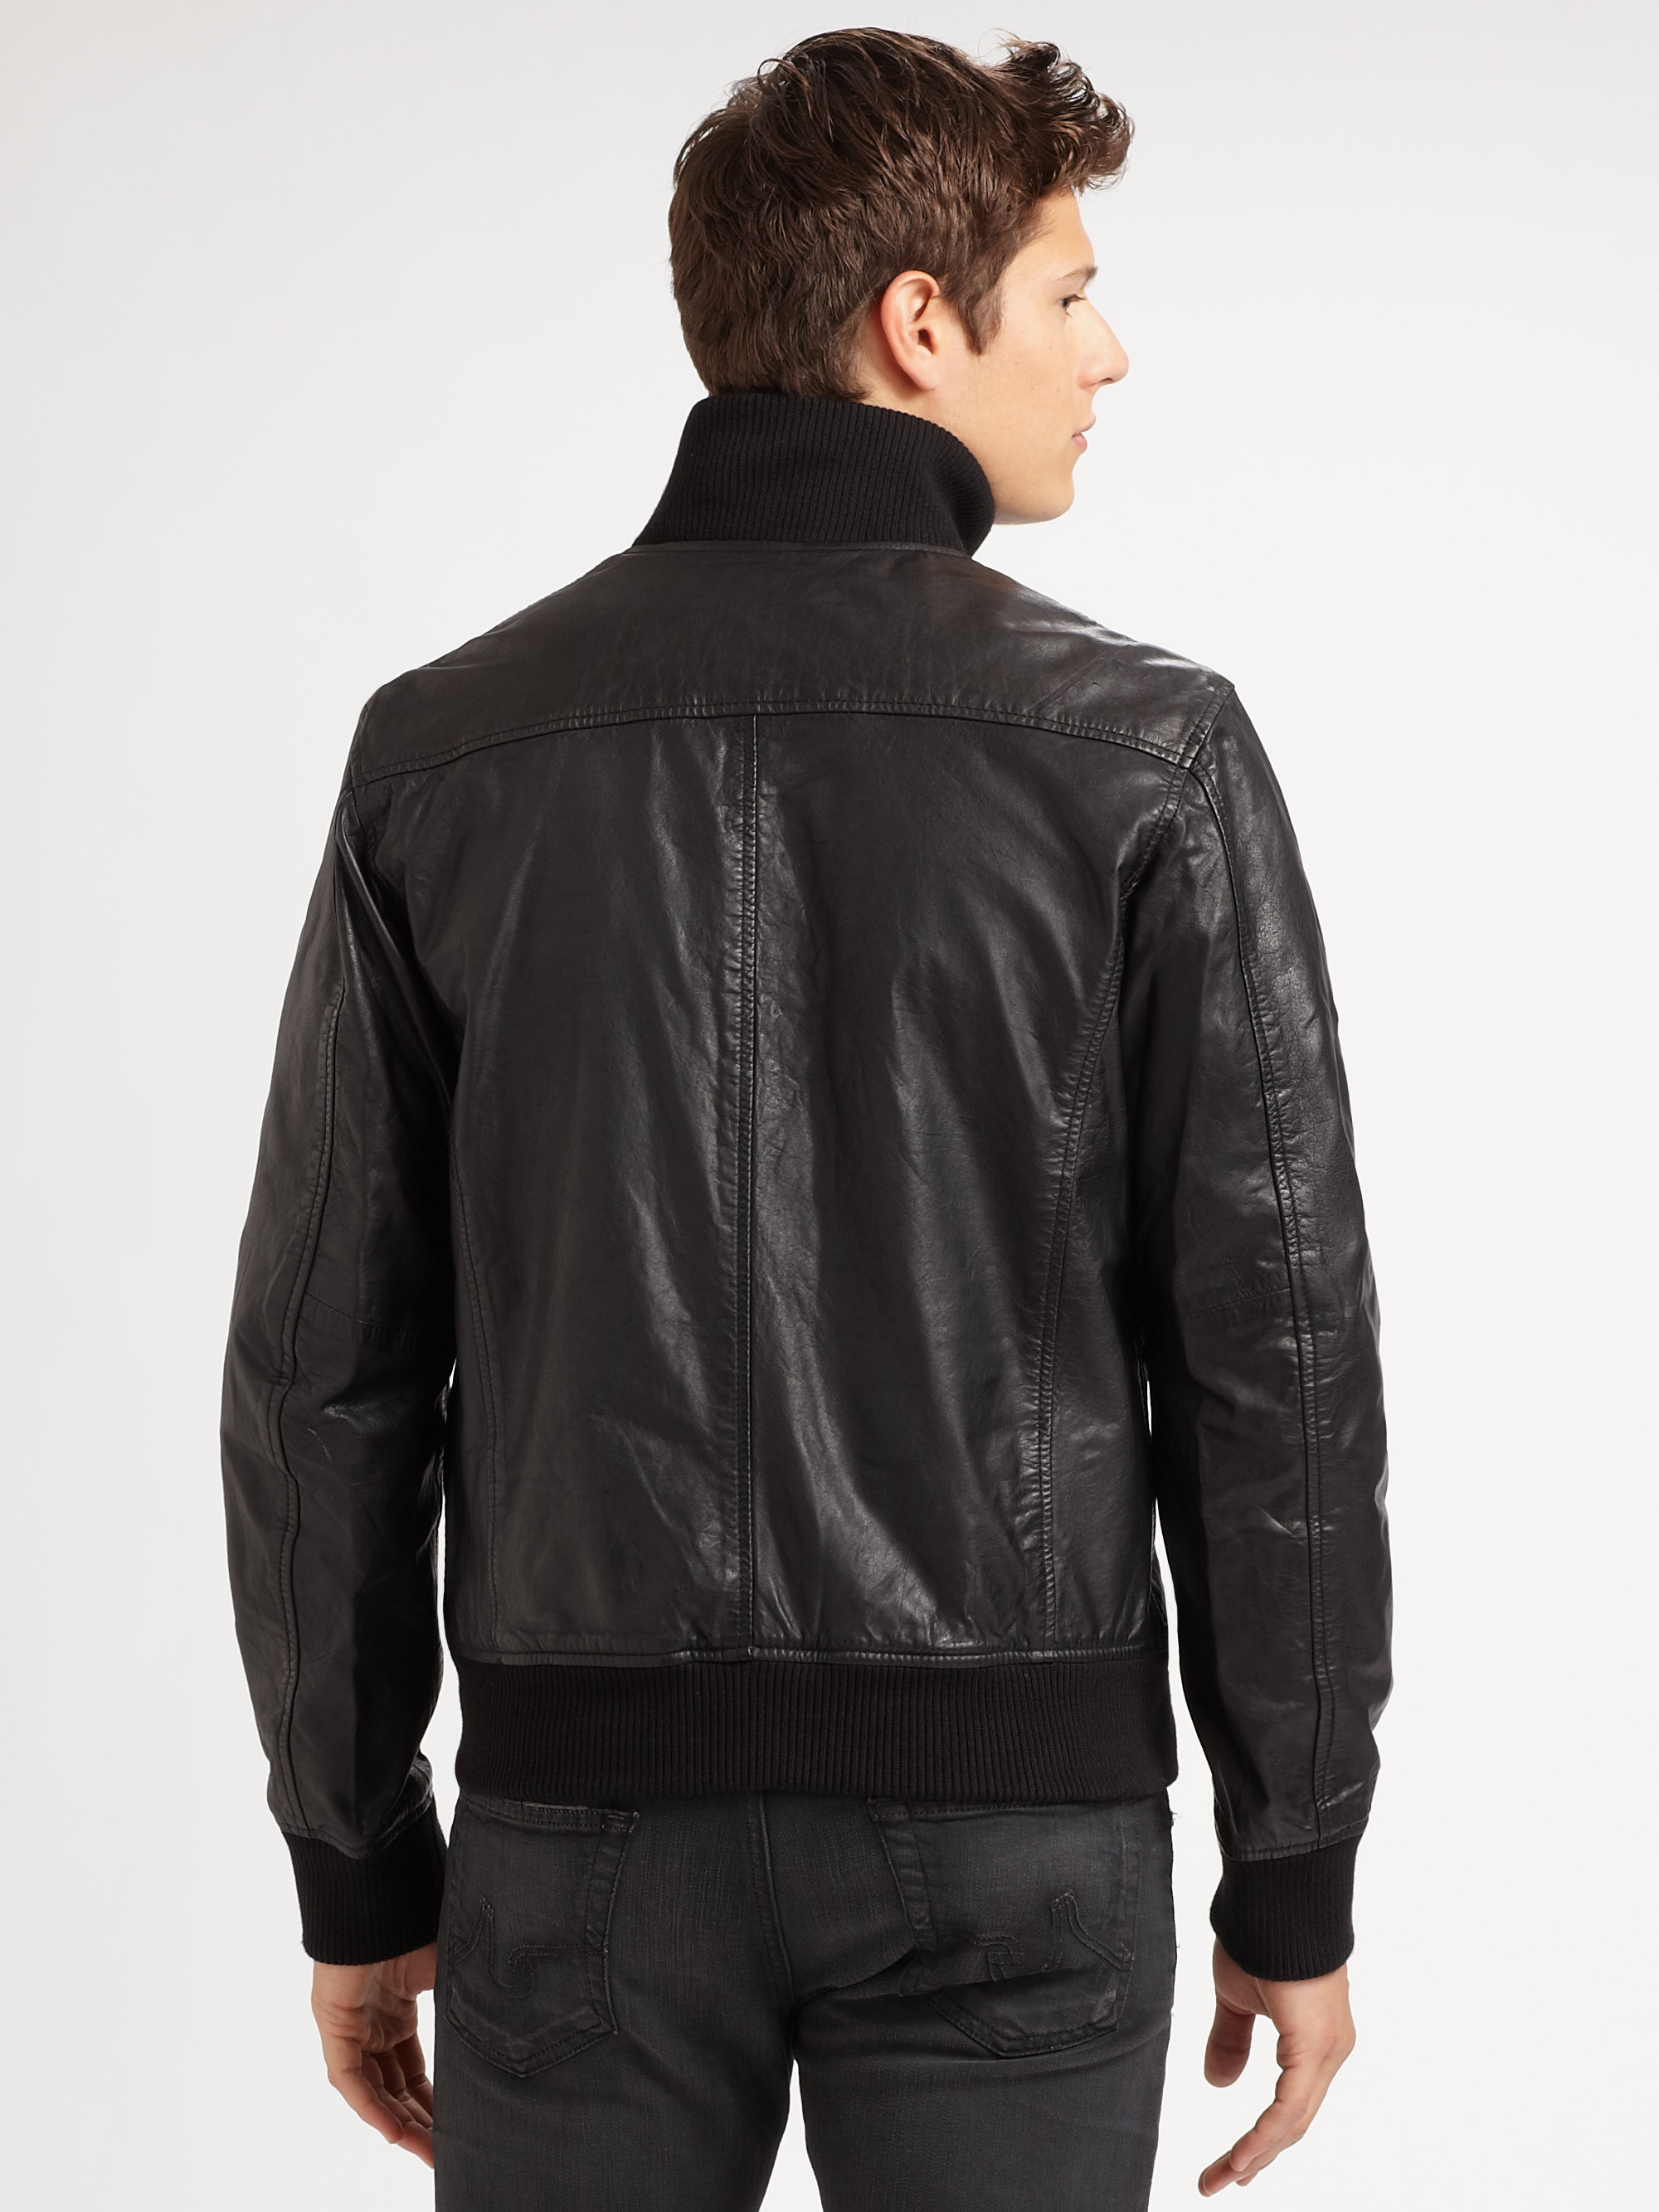 Scotch &amp soda Leather Bomber Jacket in Black for Men | Lyst